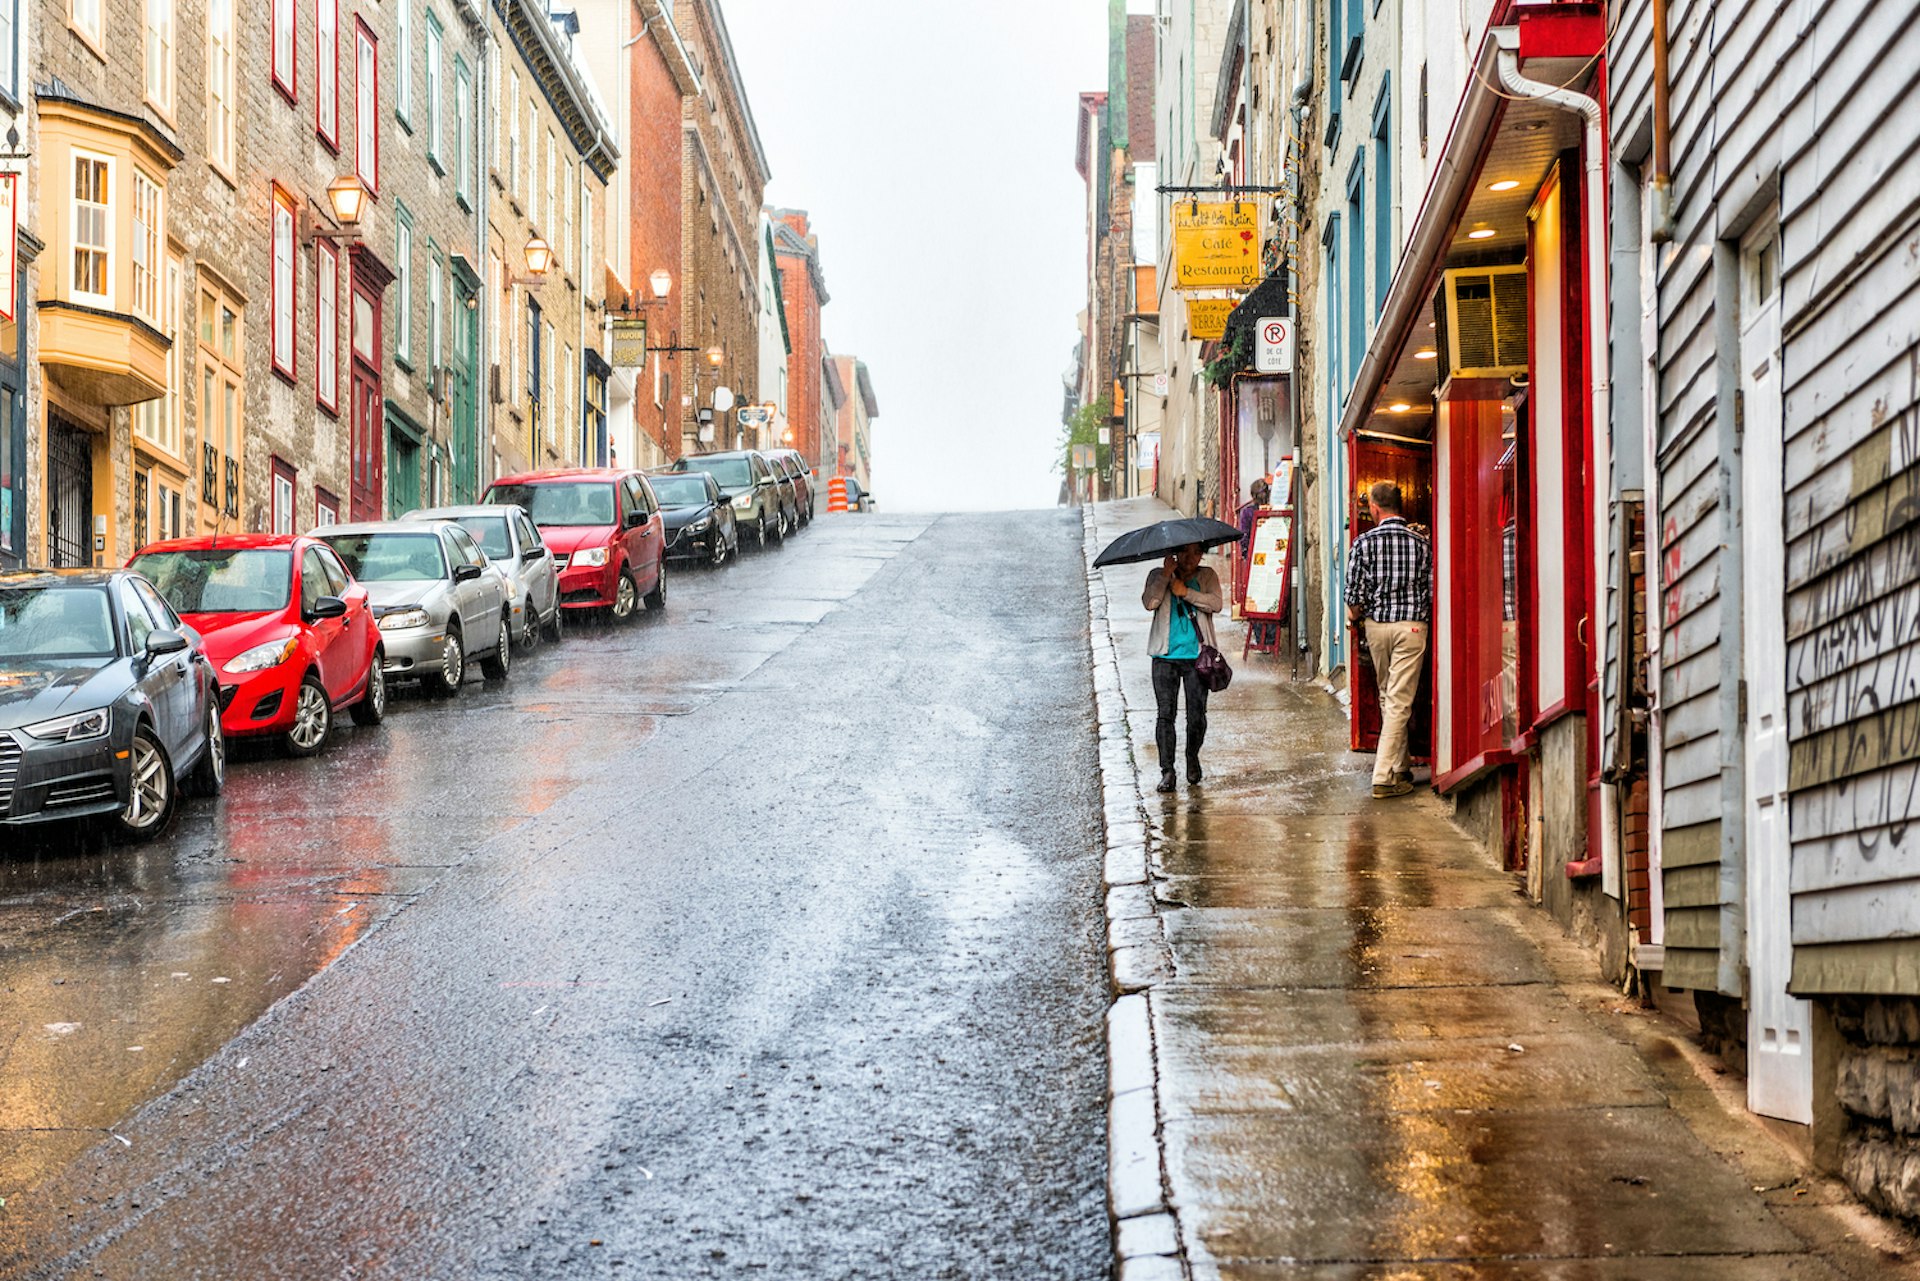 A woman walks with an umbrella by shops down a steep street in the Old Town during heavy rain, Québec City, Québec, Canada